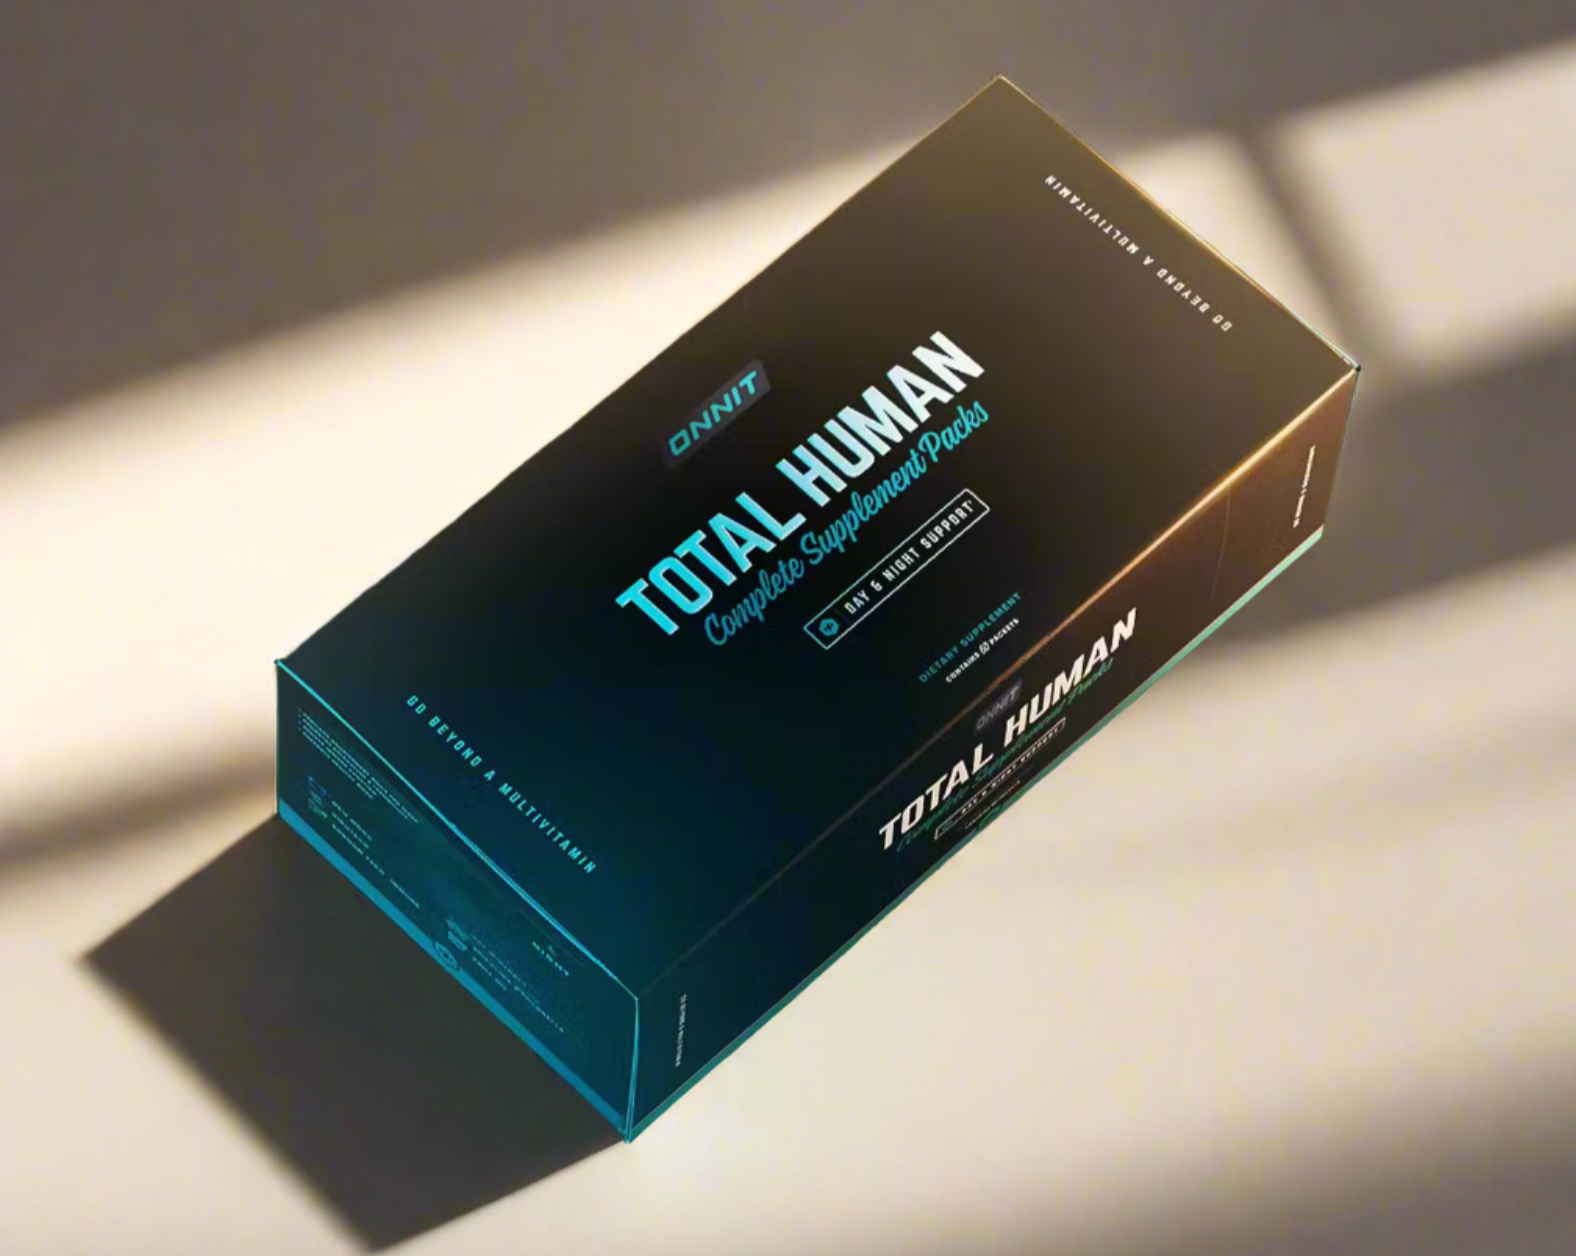 ONNIT Total Human (30ct.)